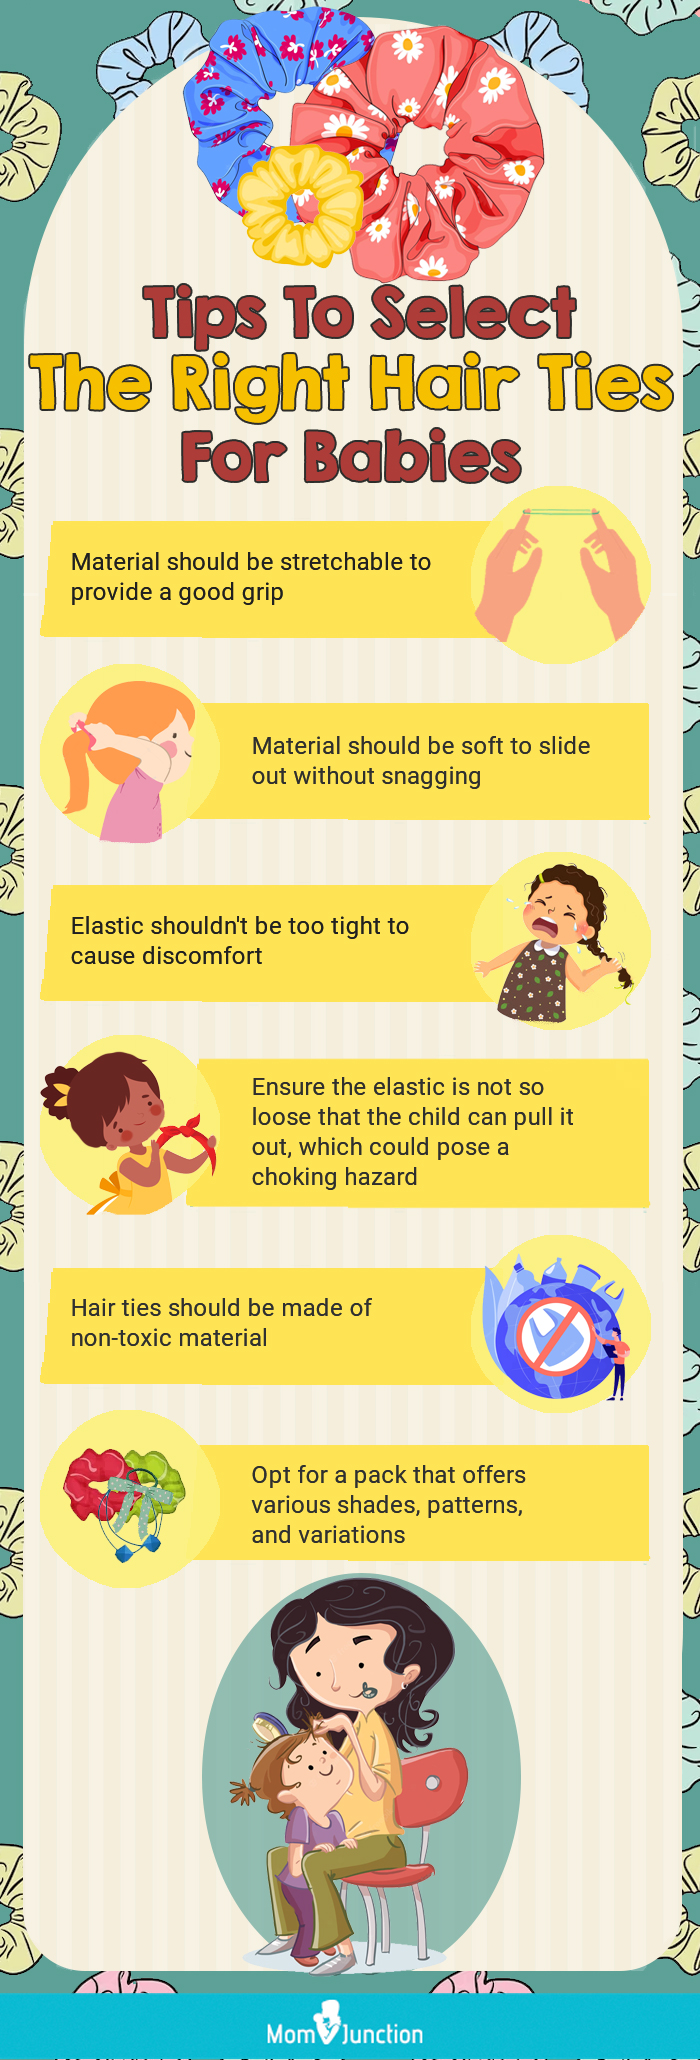 Tips To Select The Right Hair Ties For Babies (infographic)